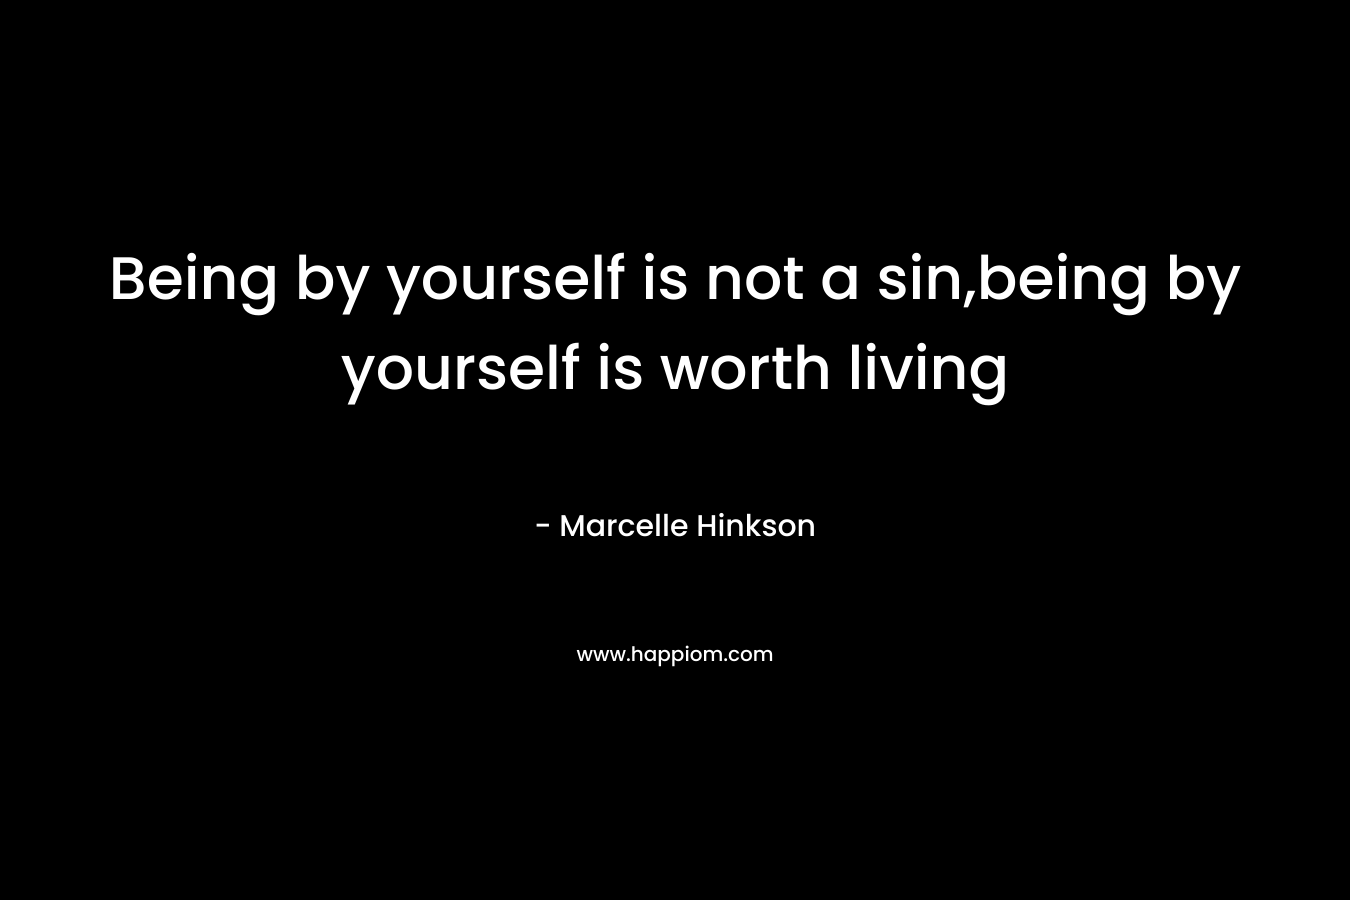 Being by yourself is not a sin,being by yourself is worth living – Marcelle Hinkson